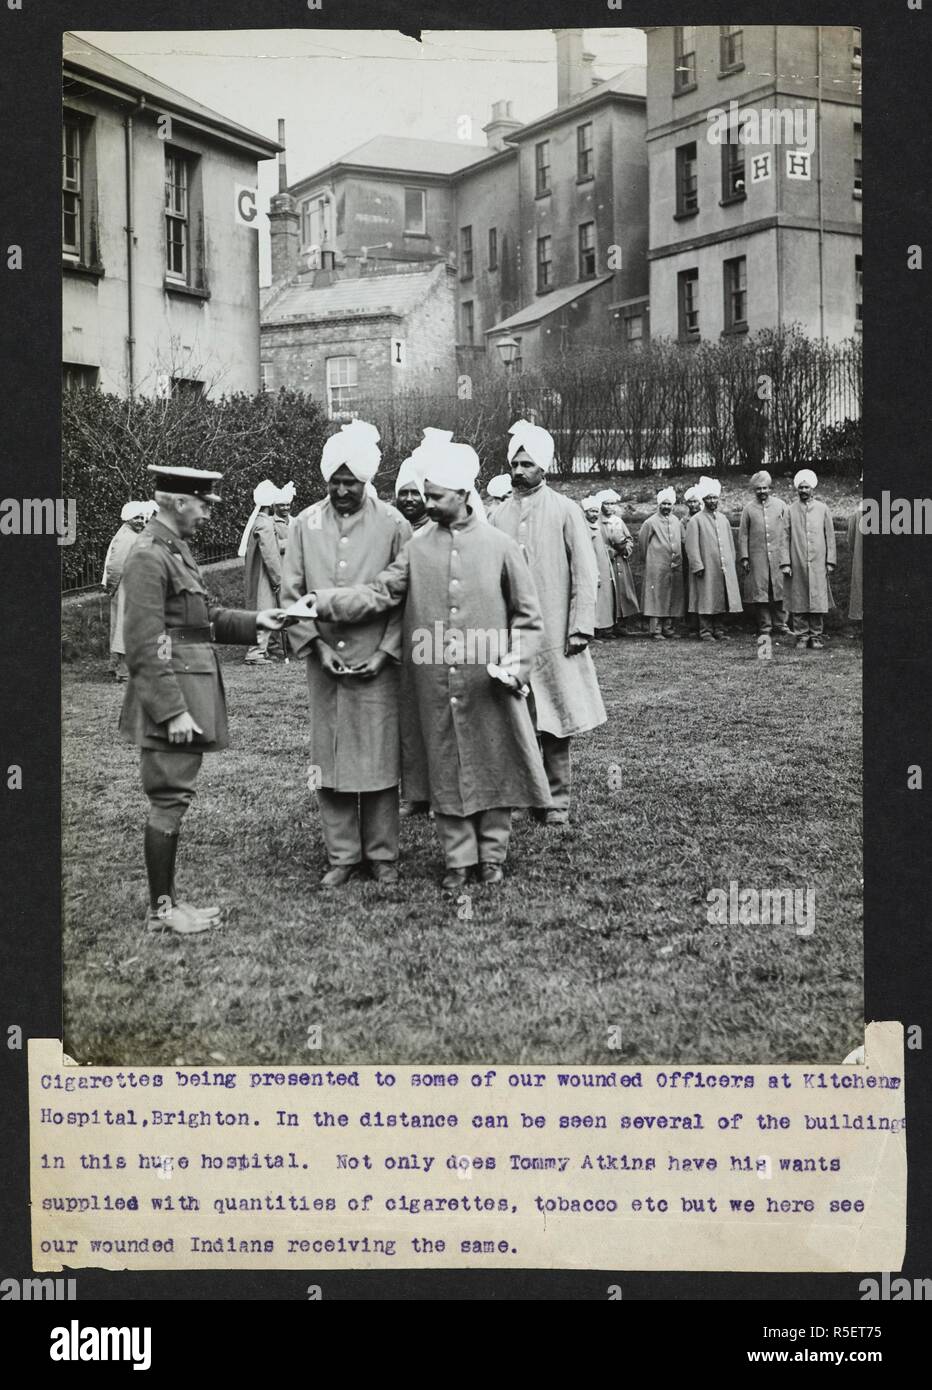 Cigarettes being presented to some of our wounded officers at Kitchener Hospital, Brighton. 'In the distance can be seen several of the buildings in this huge hospital. Not only does Tommy Atkins have his wants supplied with quantities of cigarettes, tobacco, etc but here we see our wounded Indians receiving the same'. Record of the Indian Army in Europe during the First World War. 20th century, 1915. Gelatin silver prints. Source: Photo 24/(12). Language: English. Author: Girdwood, H. D. Stock Photo